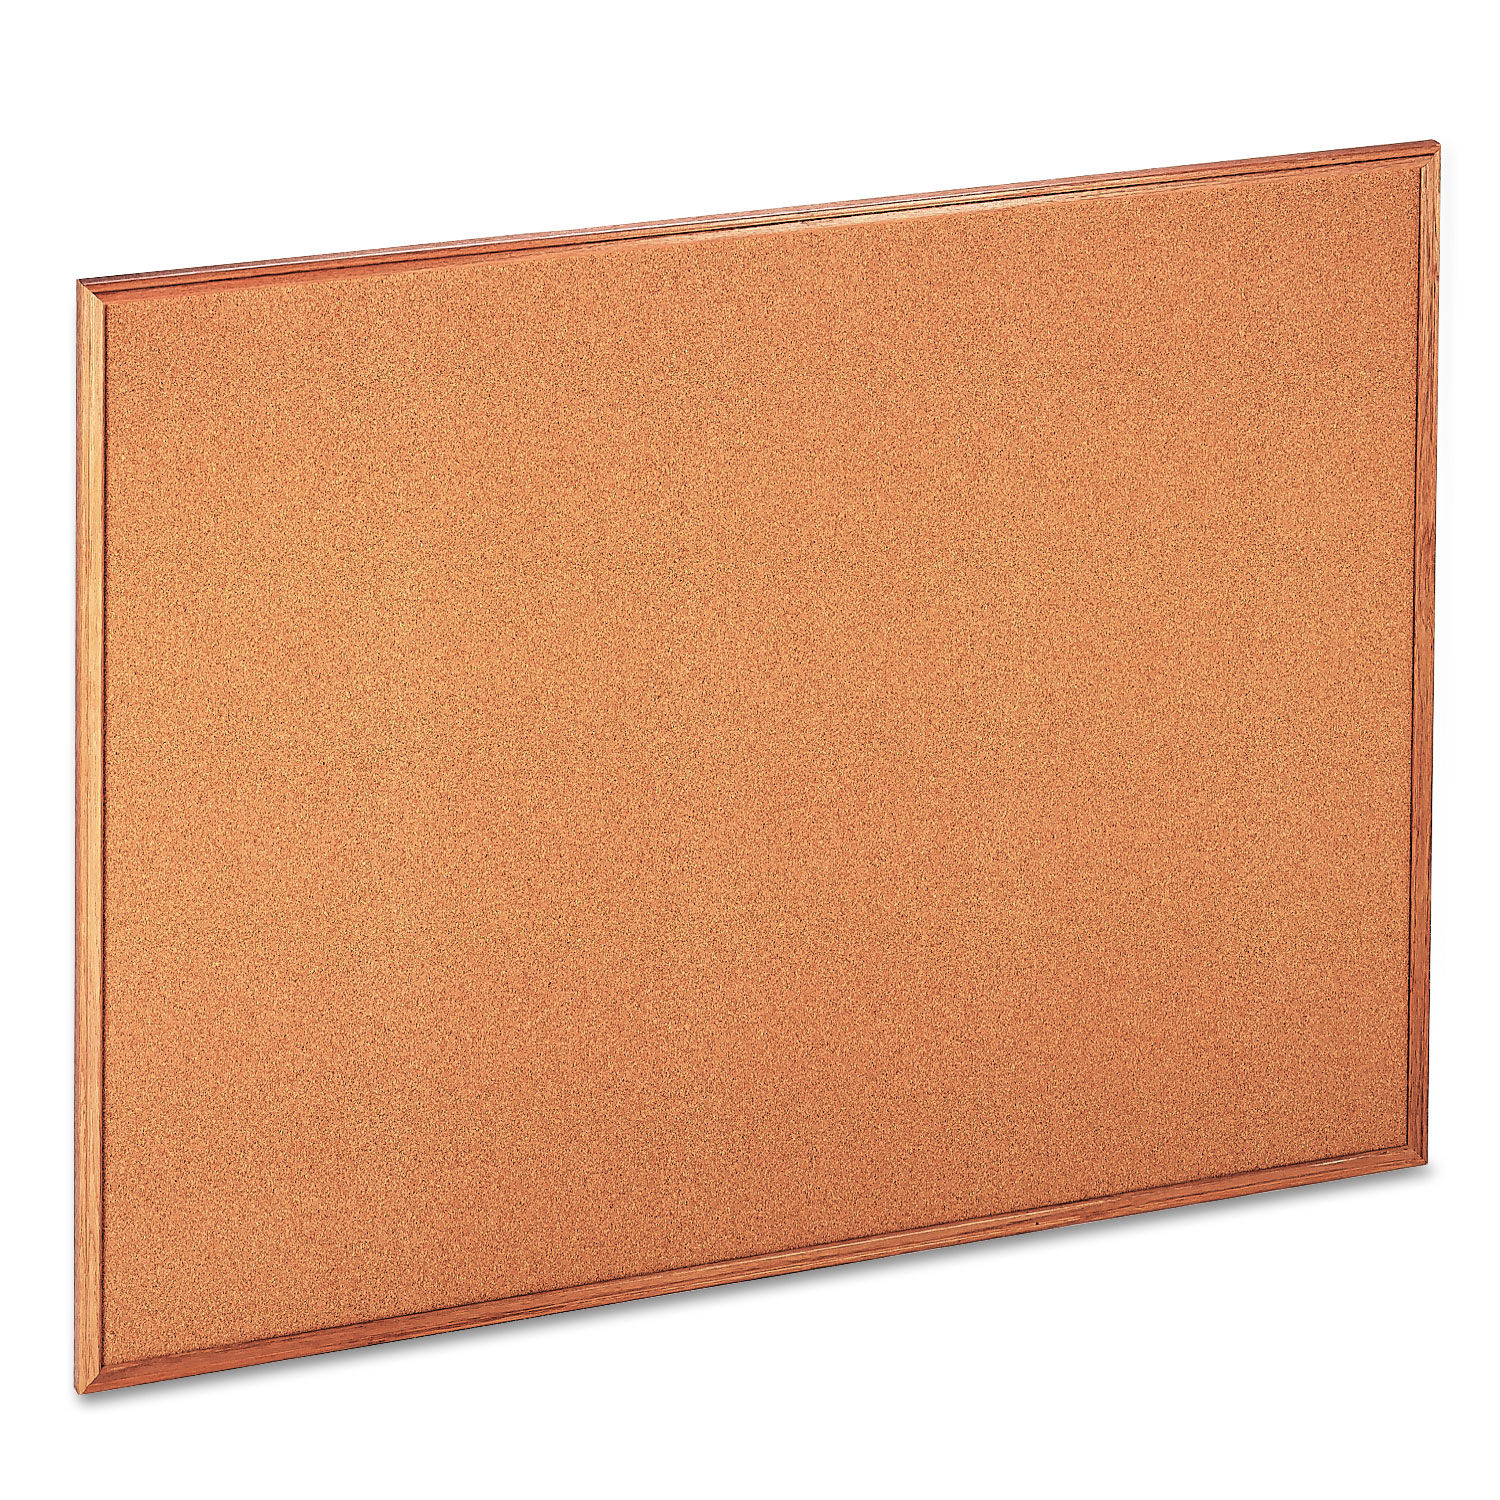 Cork Board with Oak Style Frame 48 x 36, Natural Surface